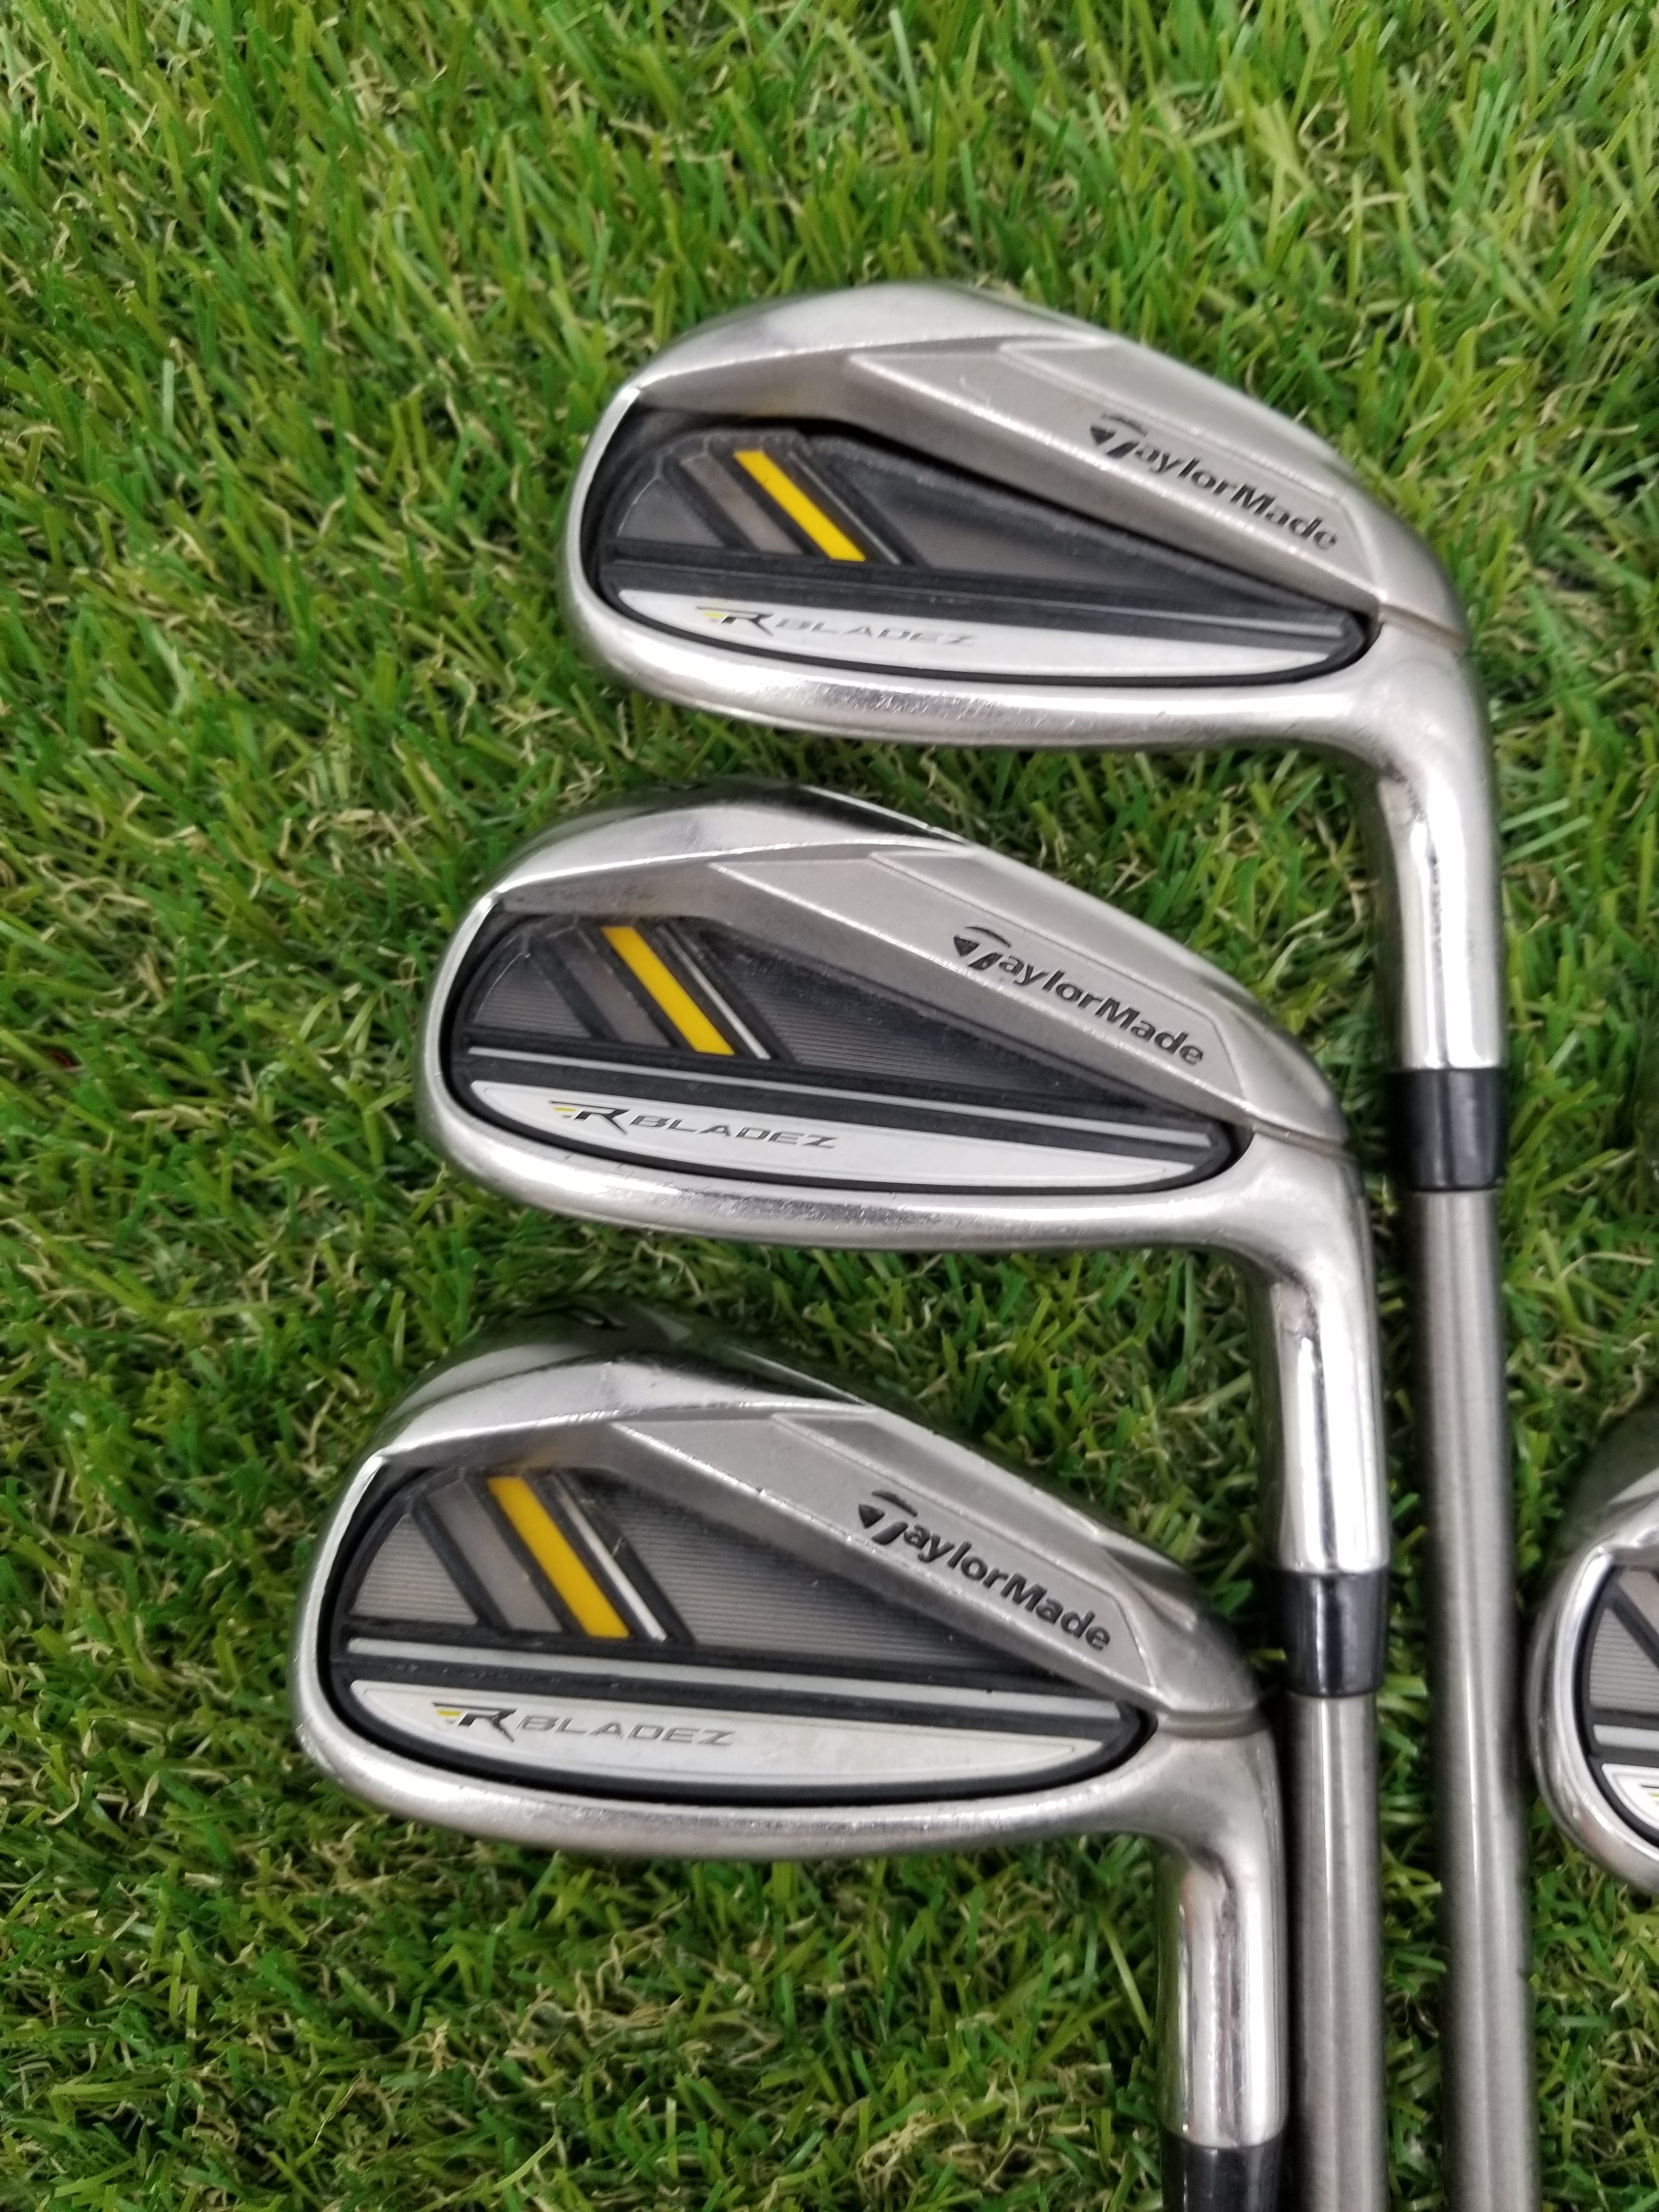 2013 TAYLORMADE RBLADEZ IRON SET 5-PW STIFF AREOTECH STEELFIBER I95 GO –  Purchase and Resell